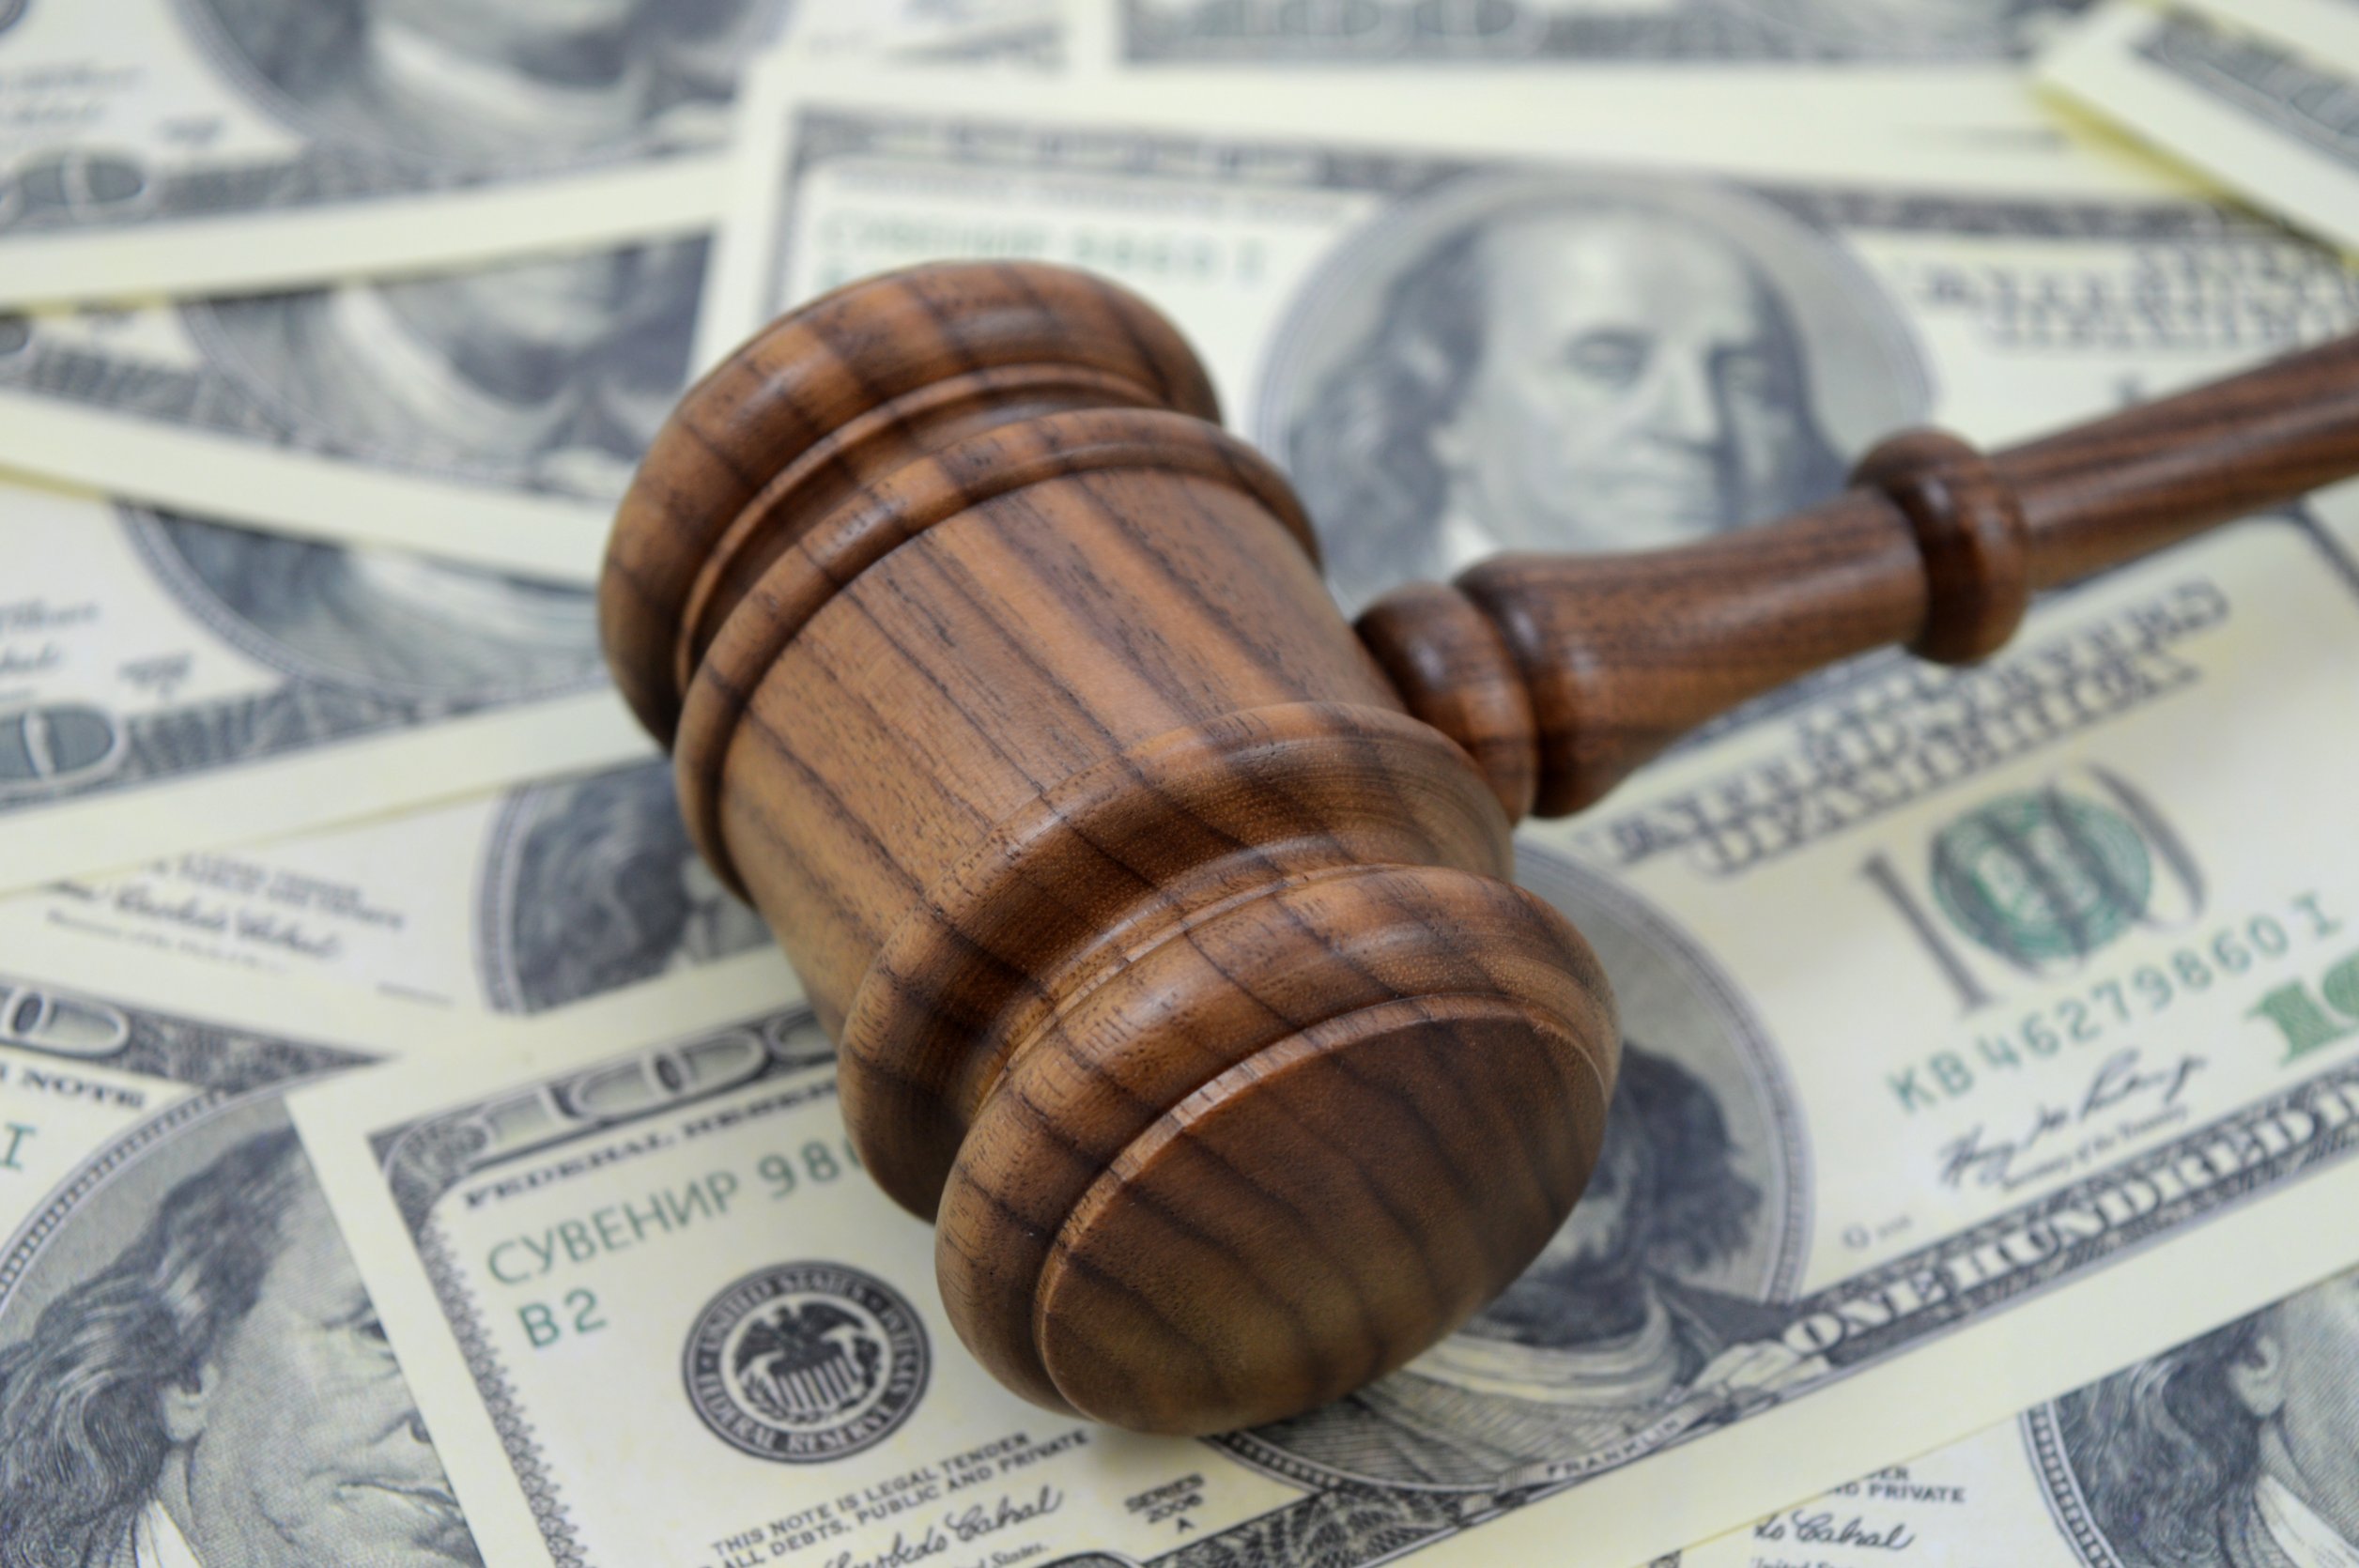 PERSONAL REPRESENTATIVE FEES IN A FLORIDA PROBATE – ESTABLISHING ENTITLEMENT AND OBJECTIONS